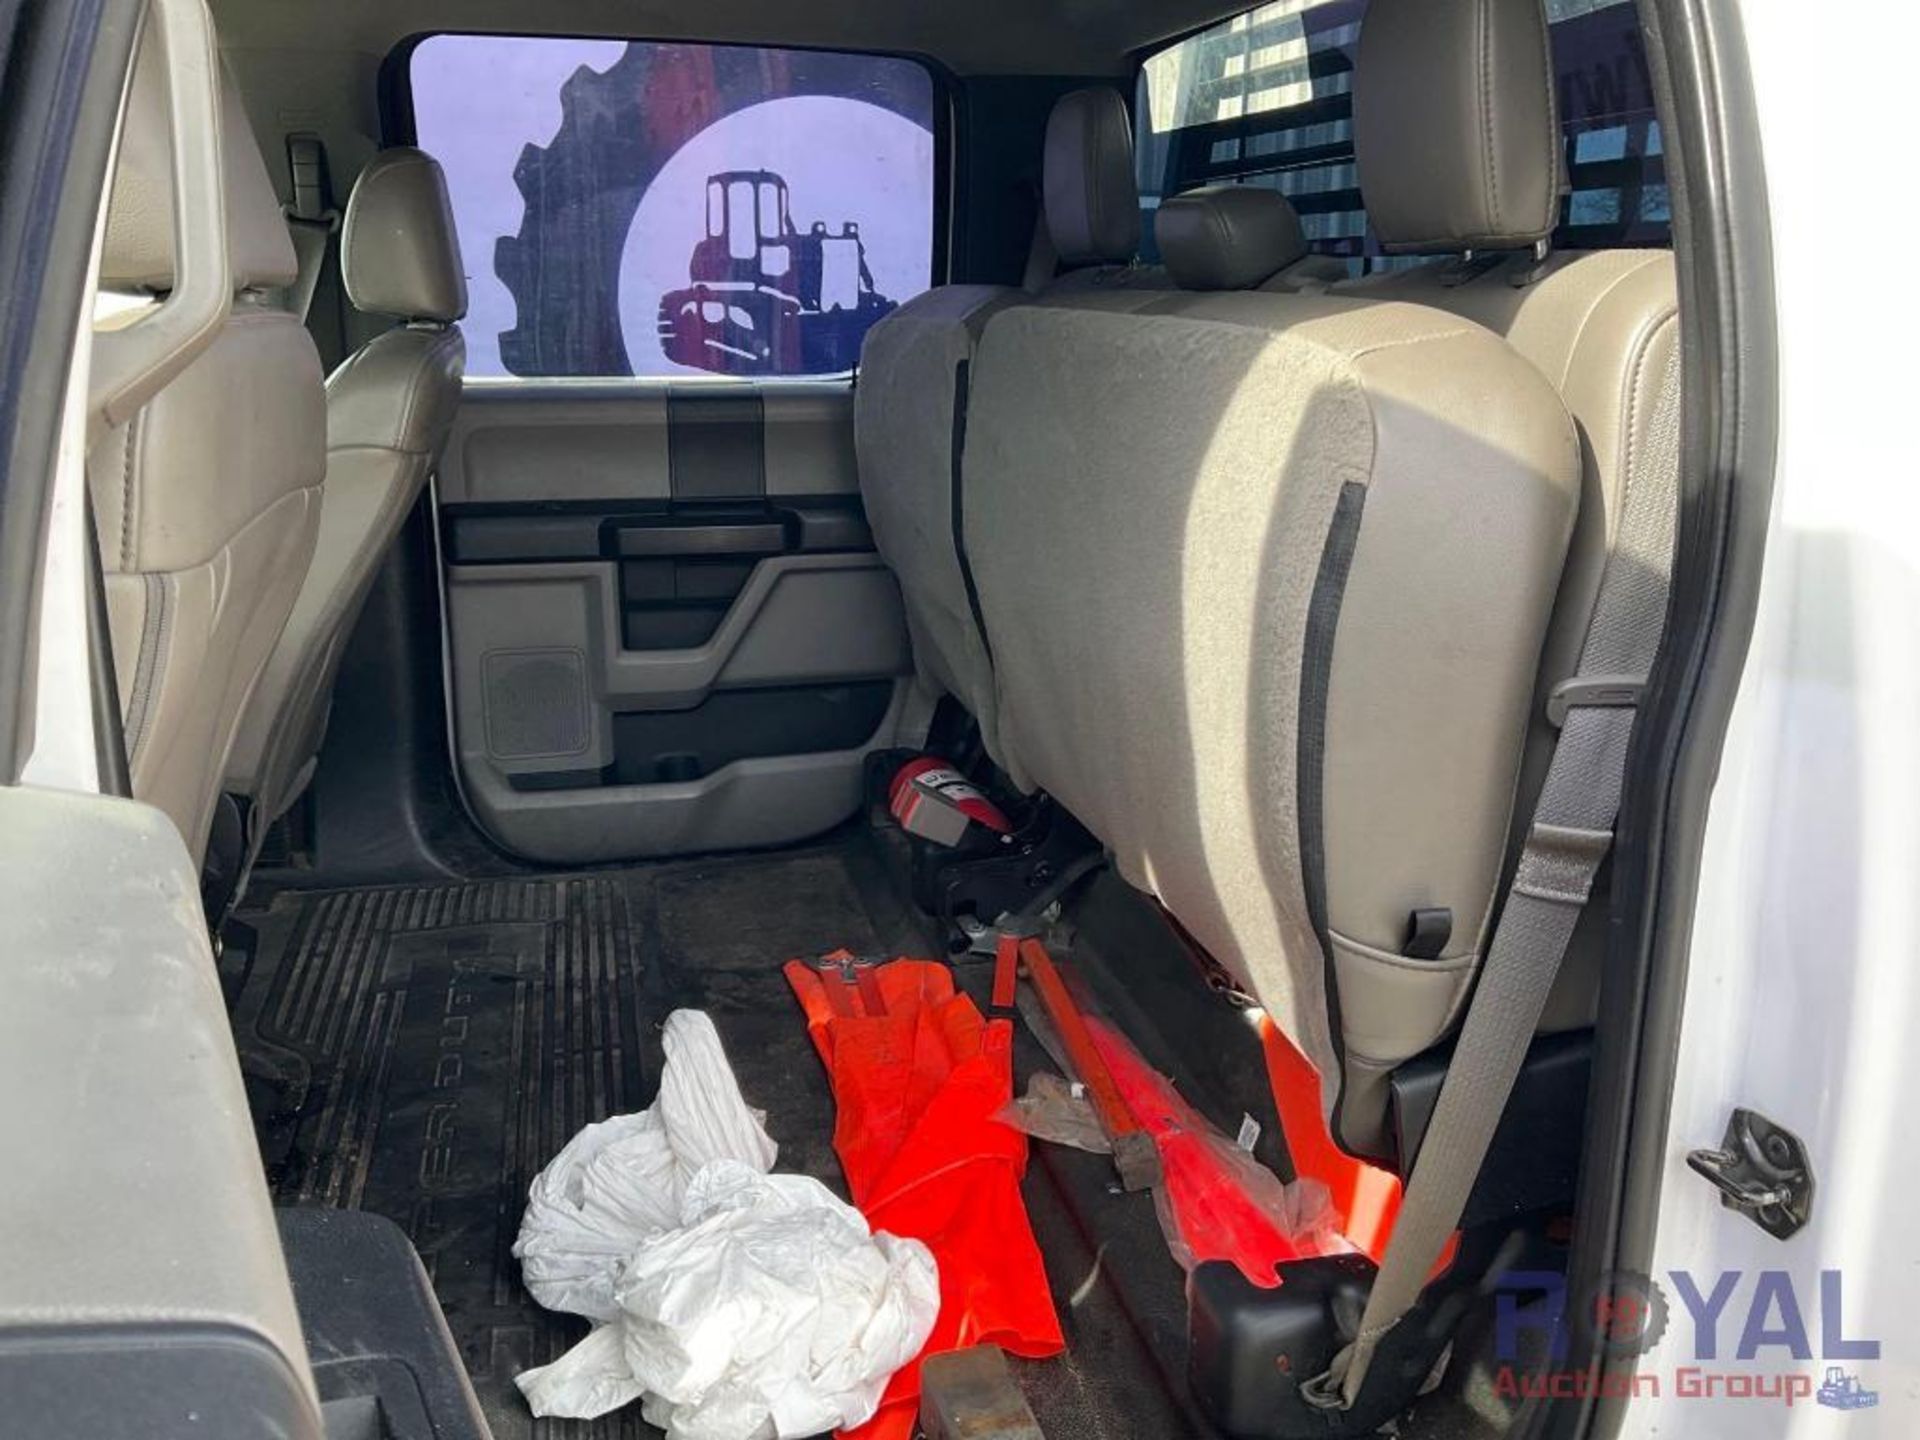 2019 Ford F250 4x4 Crew Cab Pickup Truck - Image 15 of 27